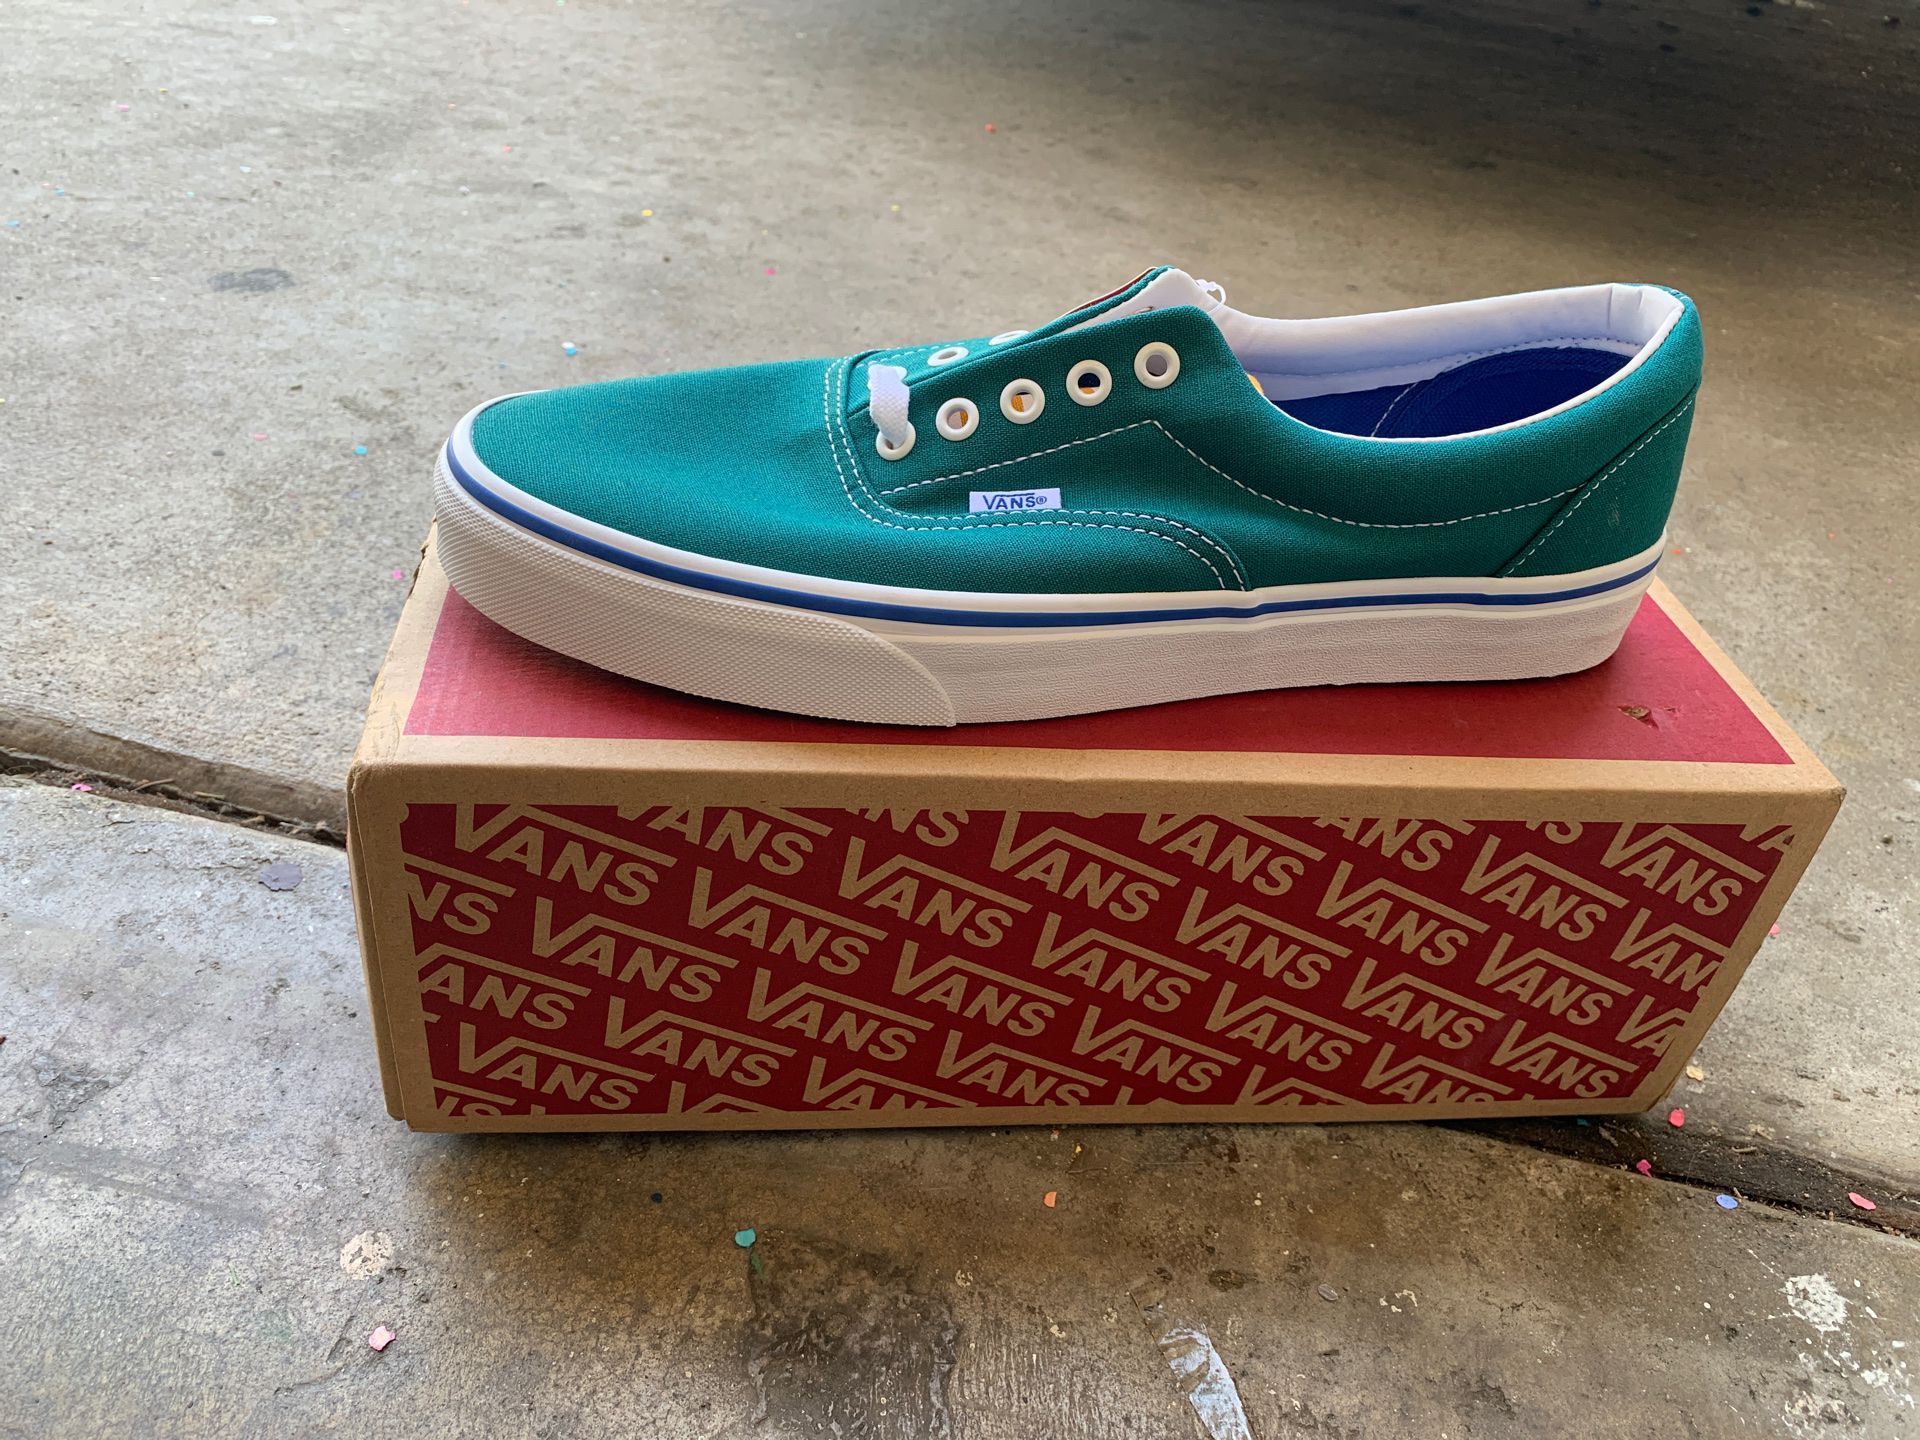 vans size 11 brand new never used